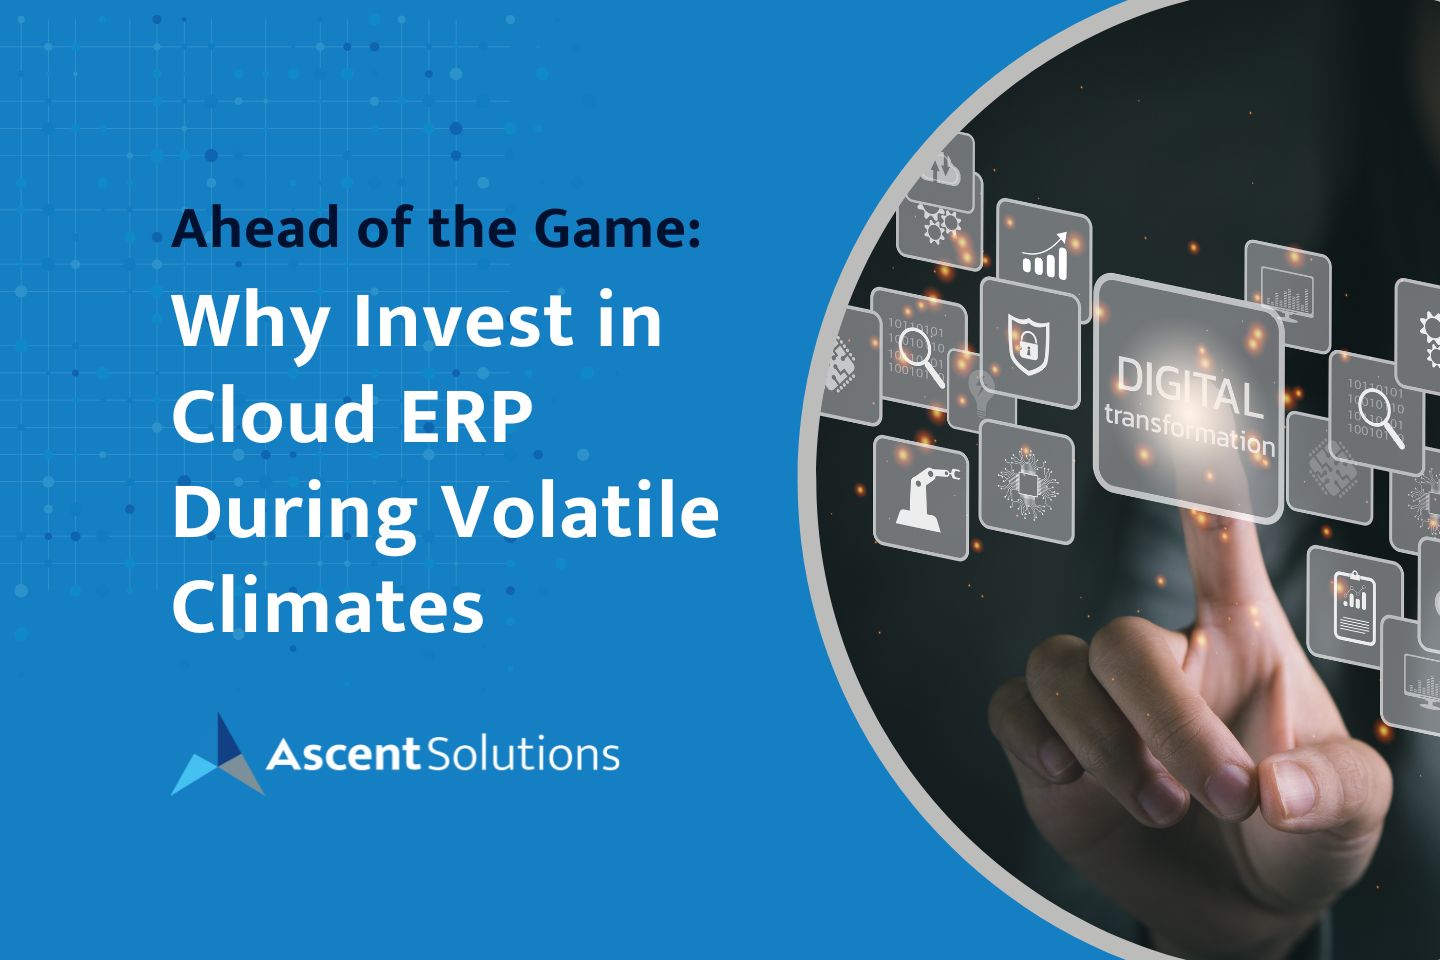 Ahead of the Game Why Invest in Cloud ERP During Volatile Climates